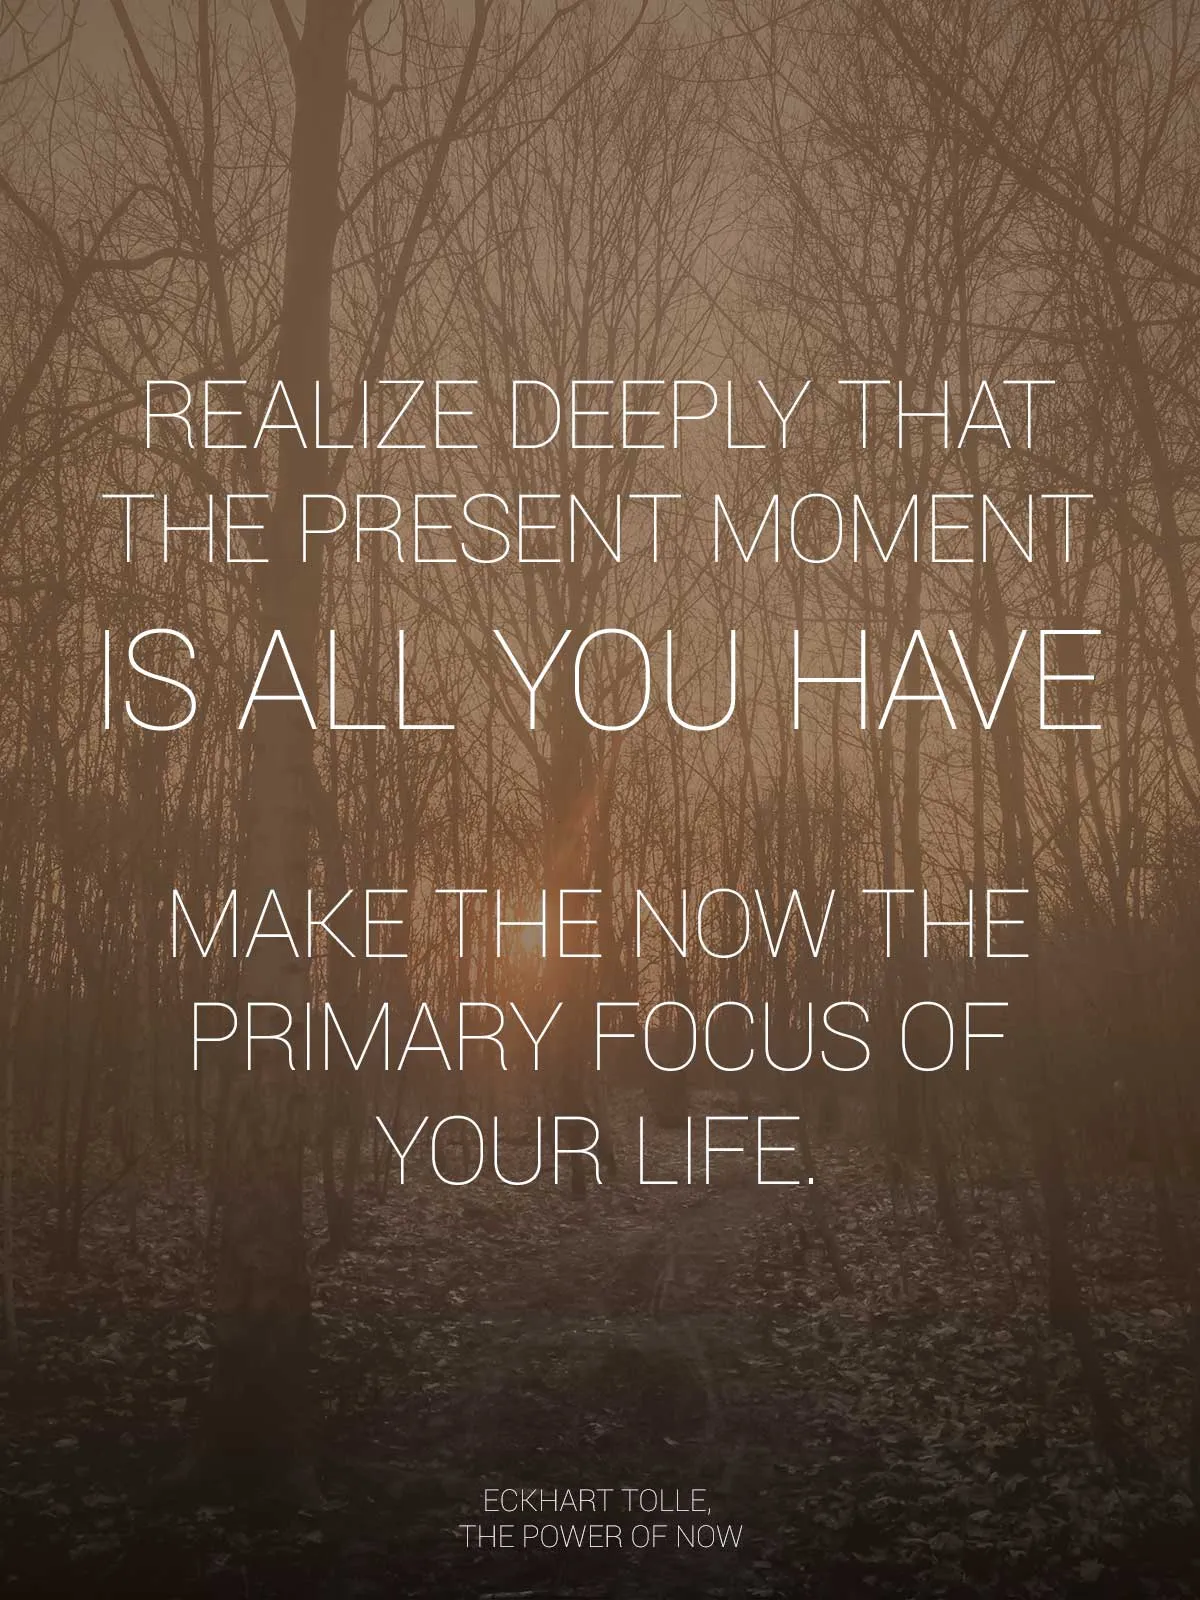 Realize deeply that the present moment is all you have. Make the NOW the primary focus of your life